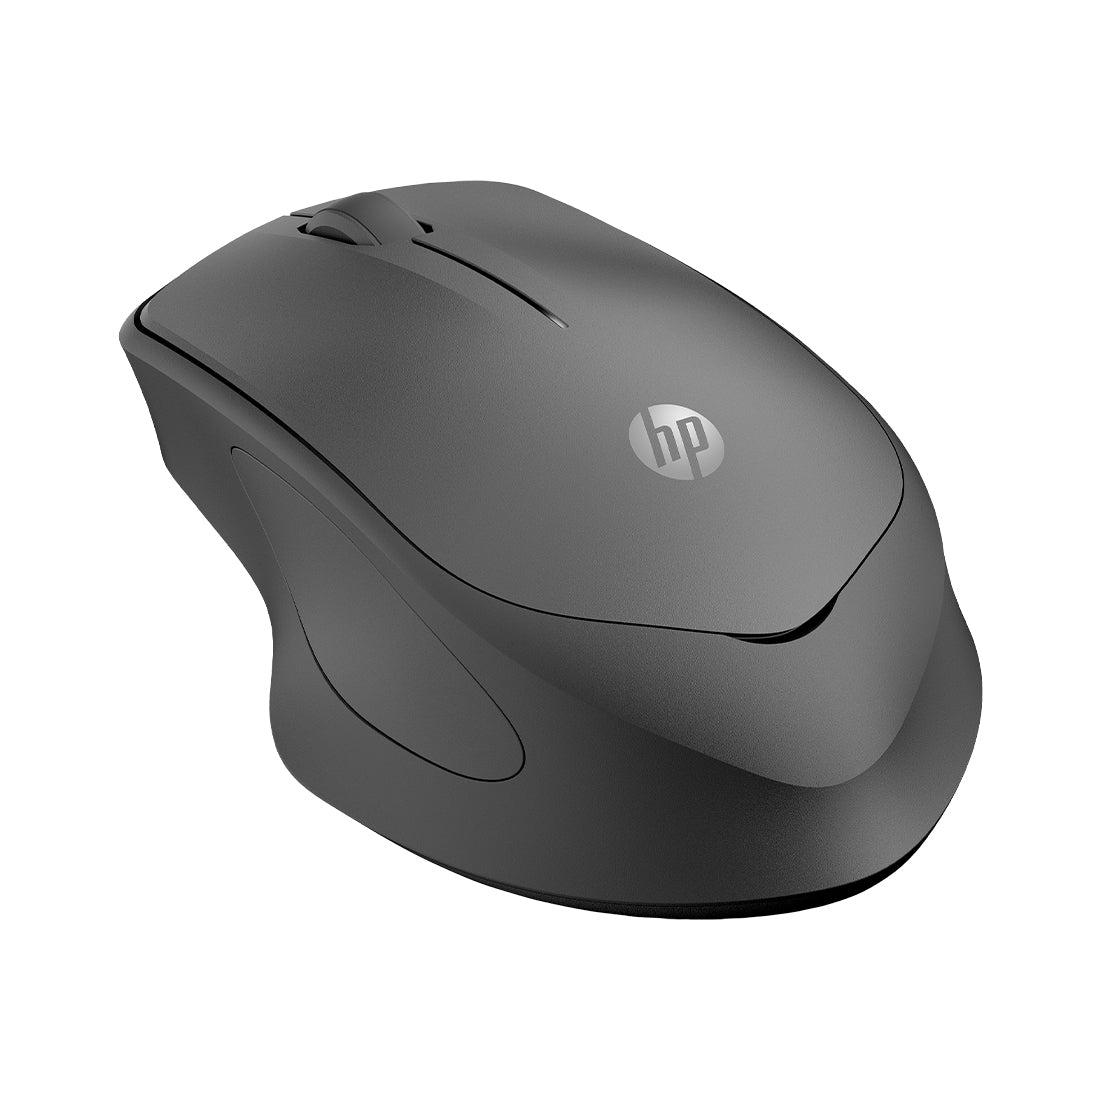 HP 280 Silent Wireless Optical Mouse with 2.4GHz Wireless Connection